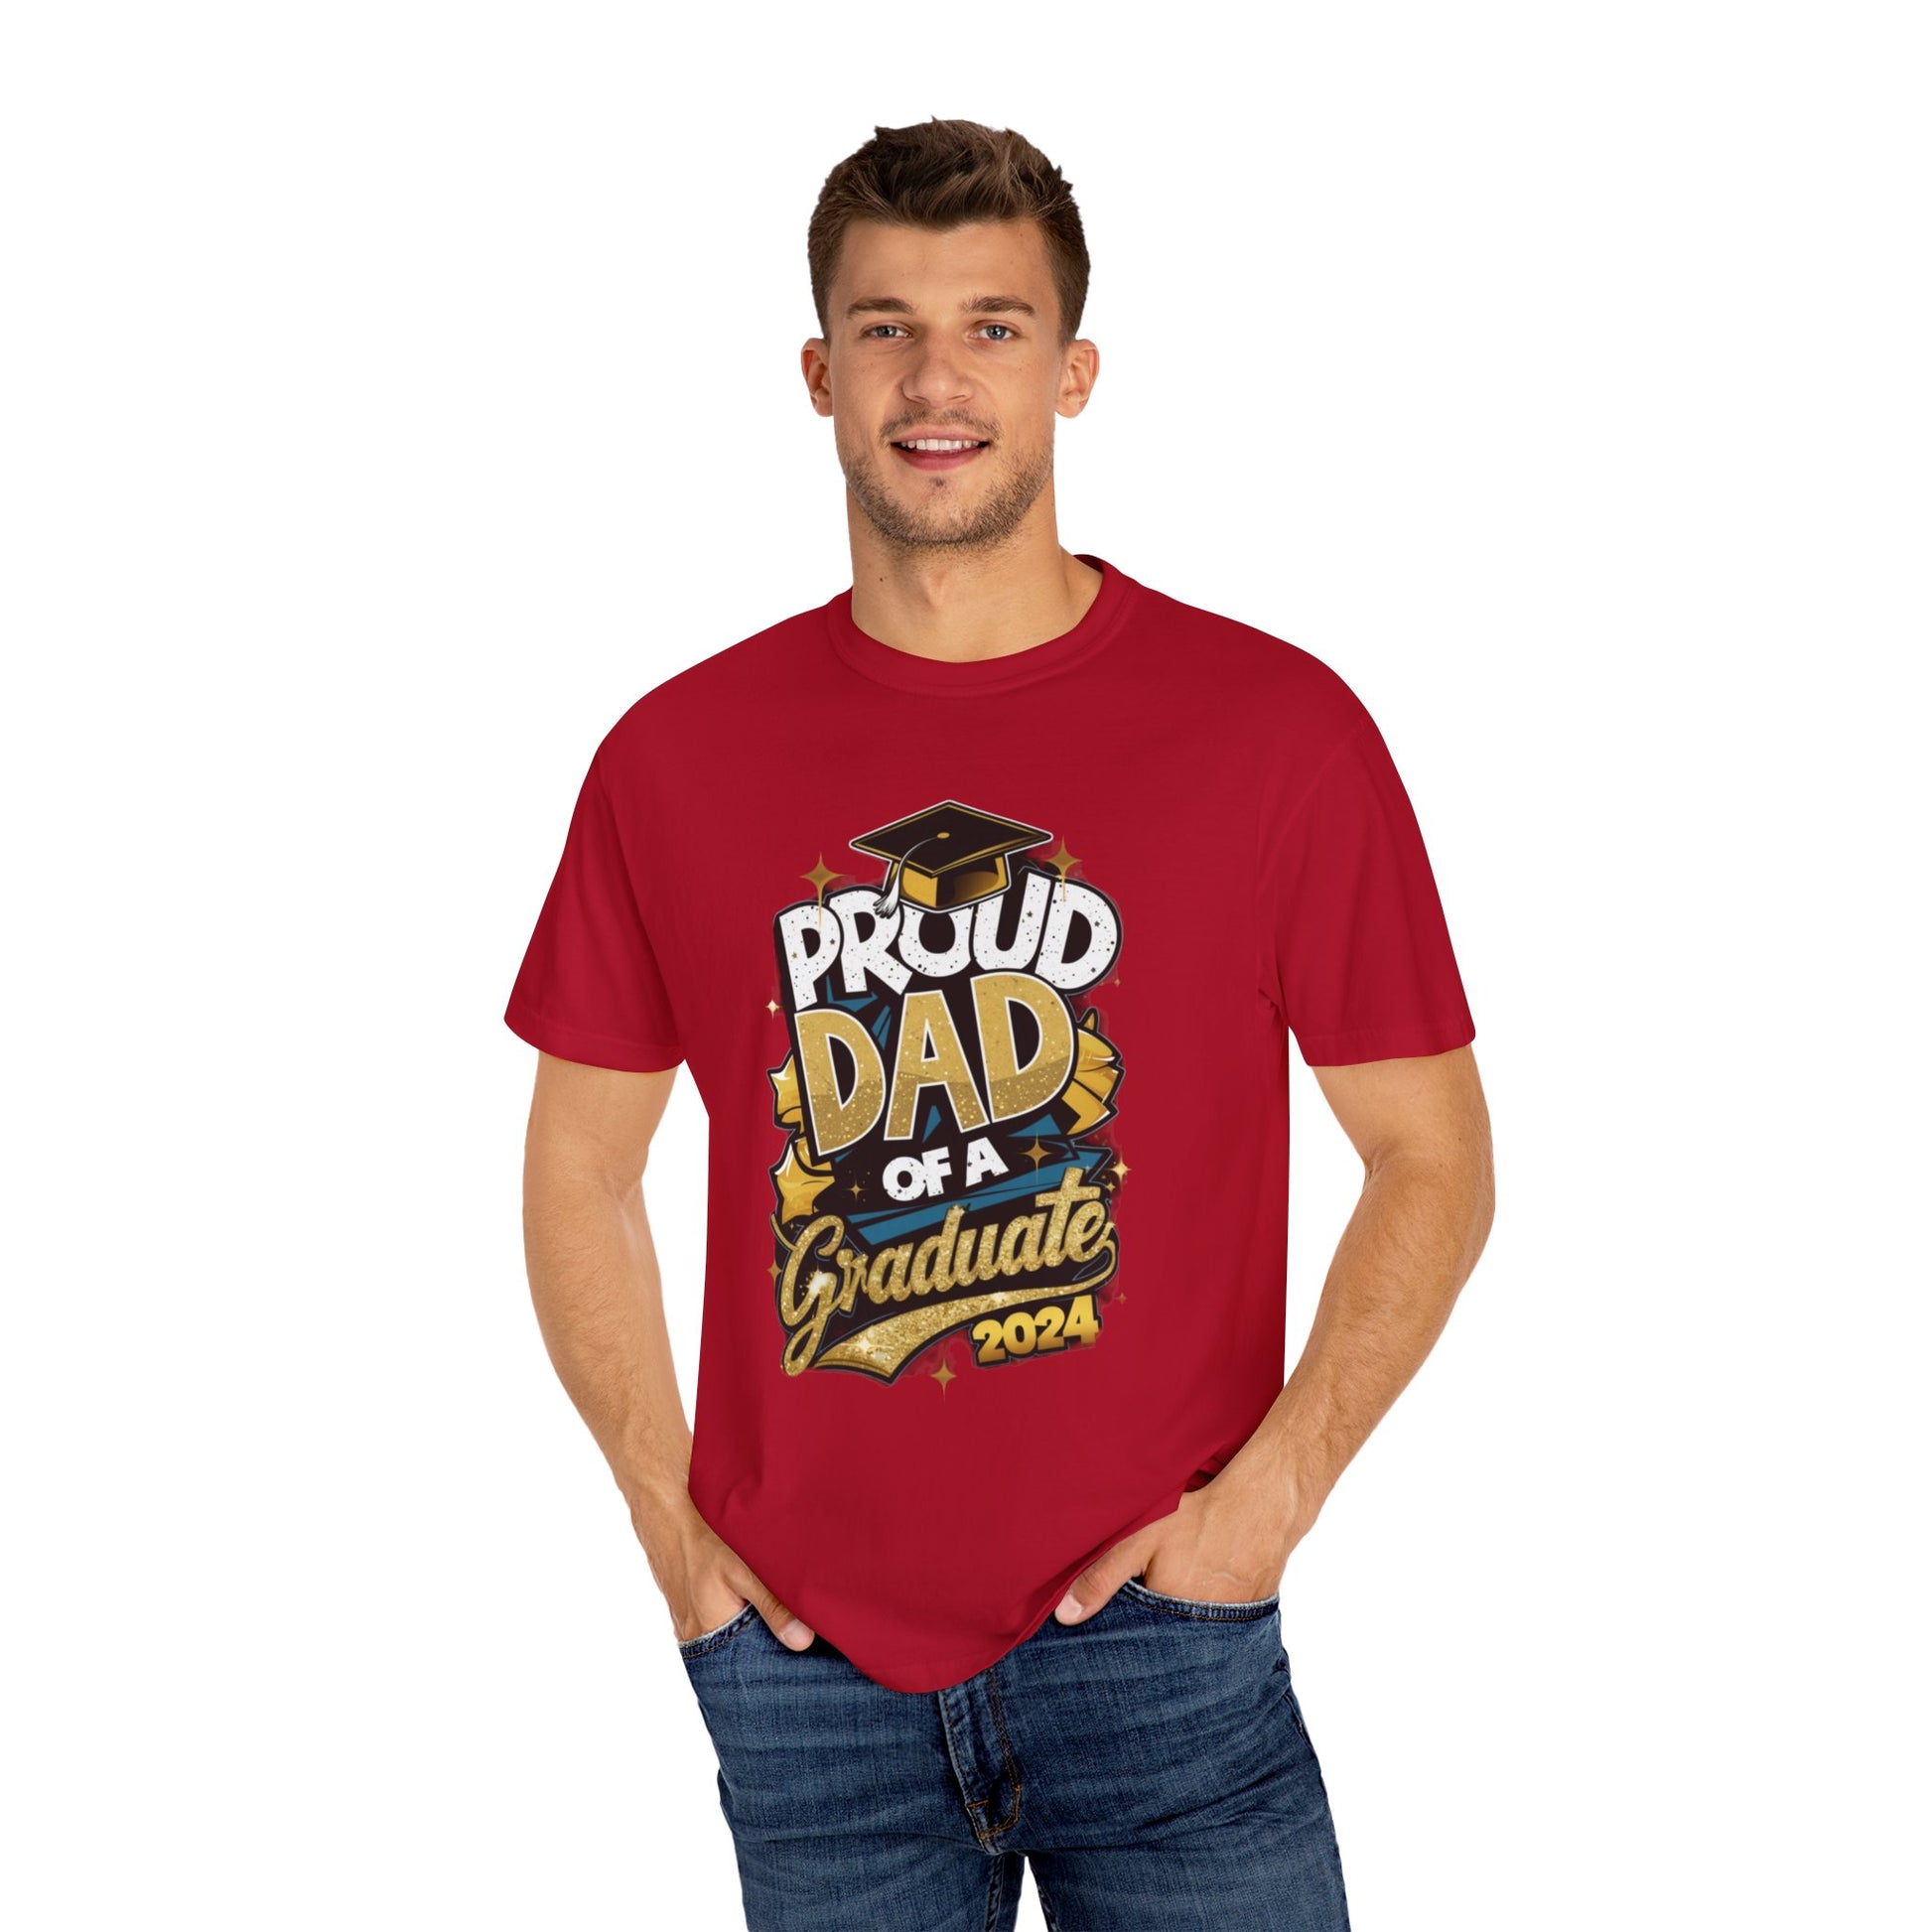 Proud Dad of a 2024 Graduate Unisex Garment-dyed T-shirt Cotton Funny Humorous Graphic Soft Premium Unisex Men Women Red T-shirt Birthday Gift-21